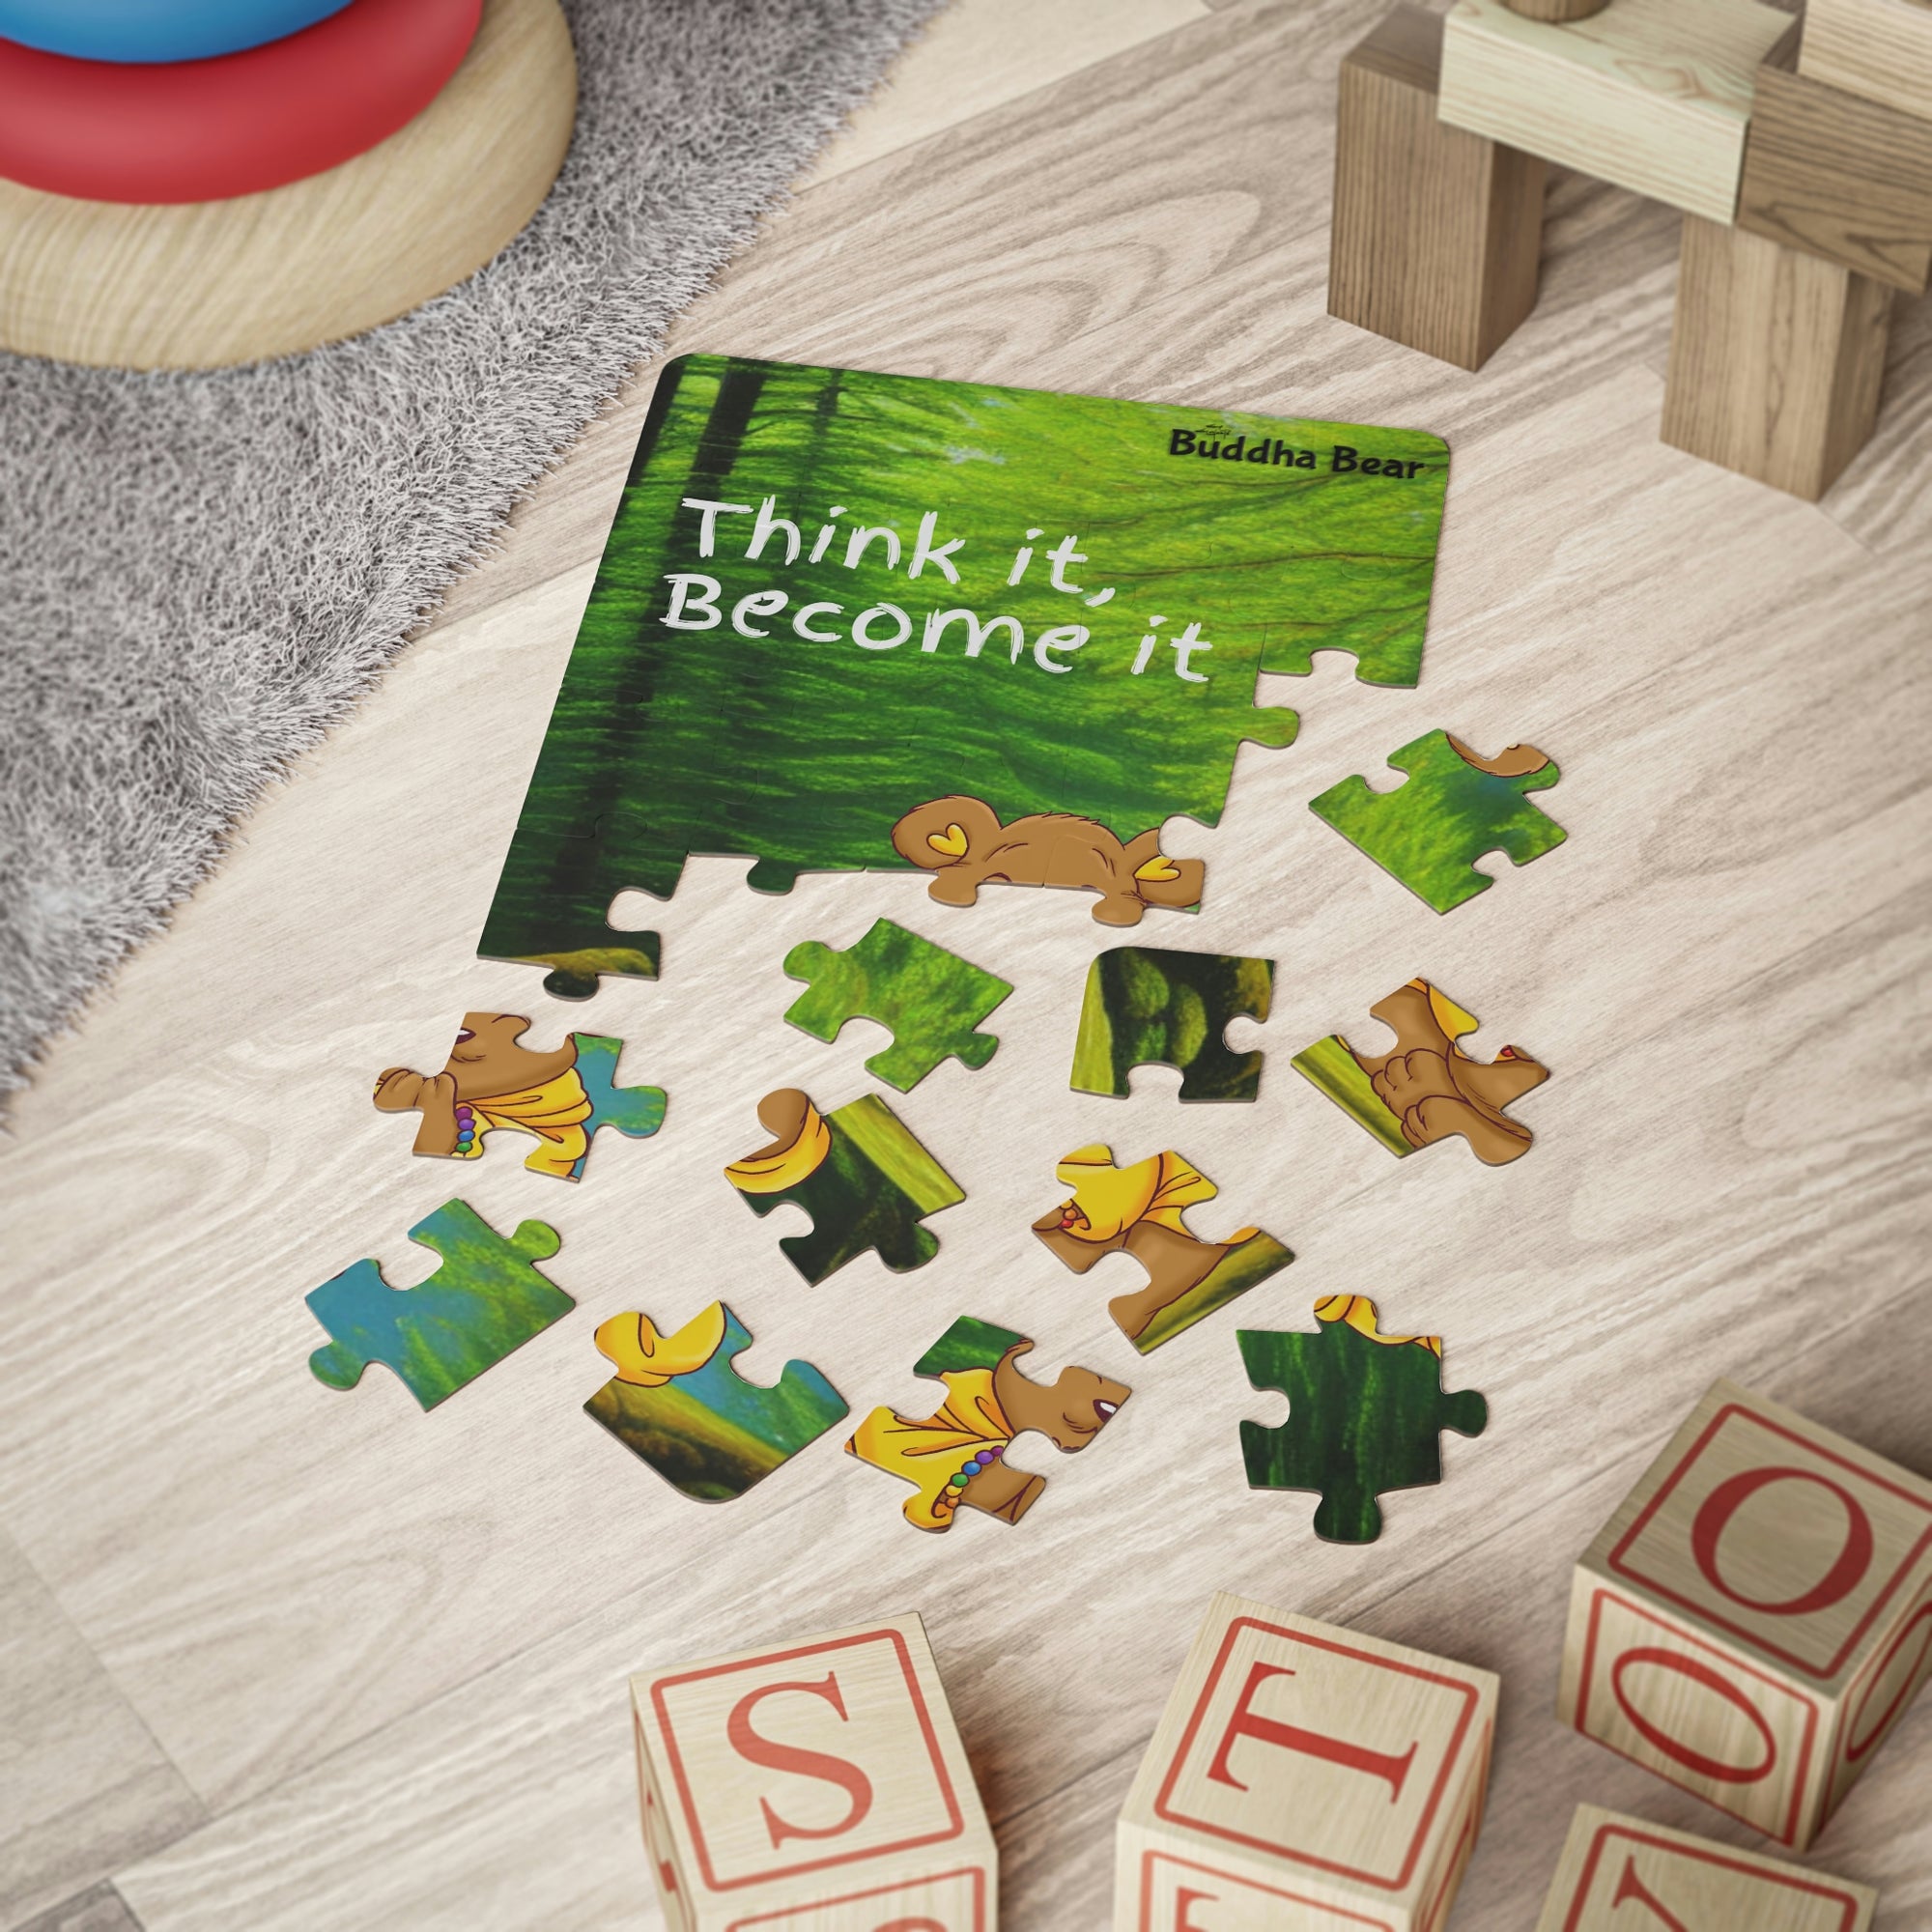 Buddha Bear's "Think it, Become it" Puzzle